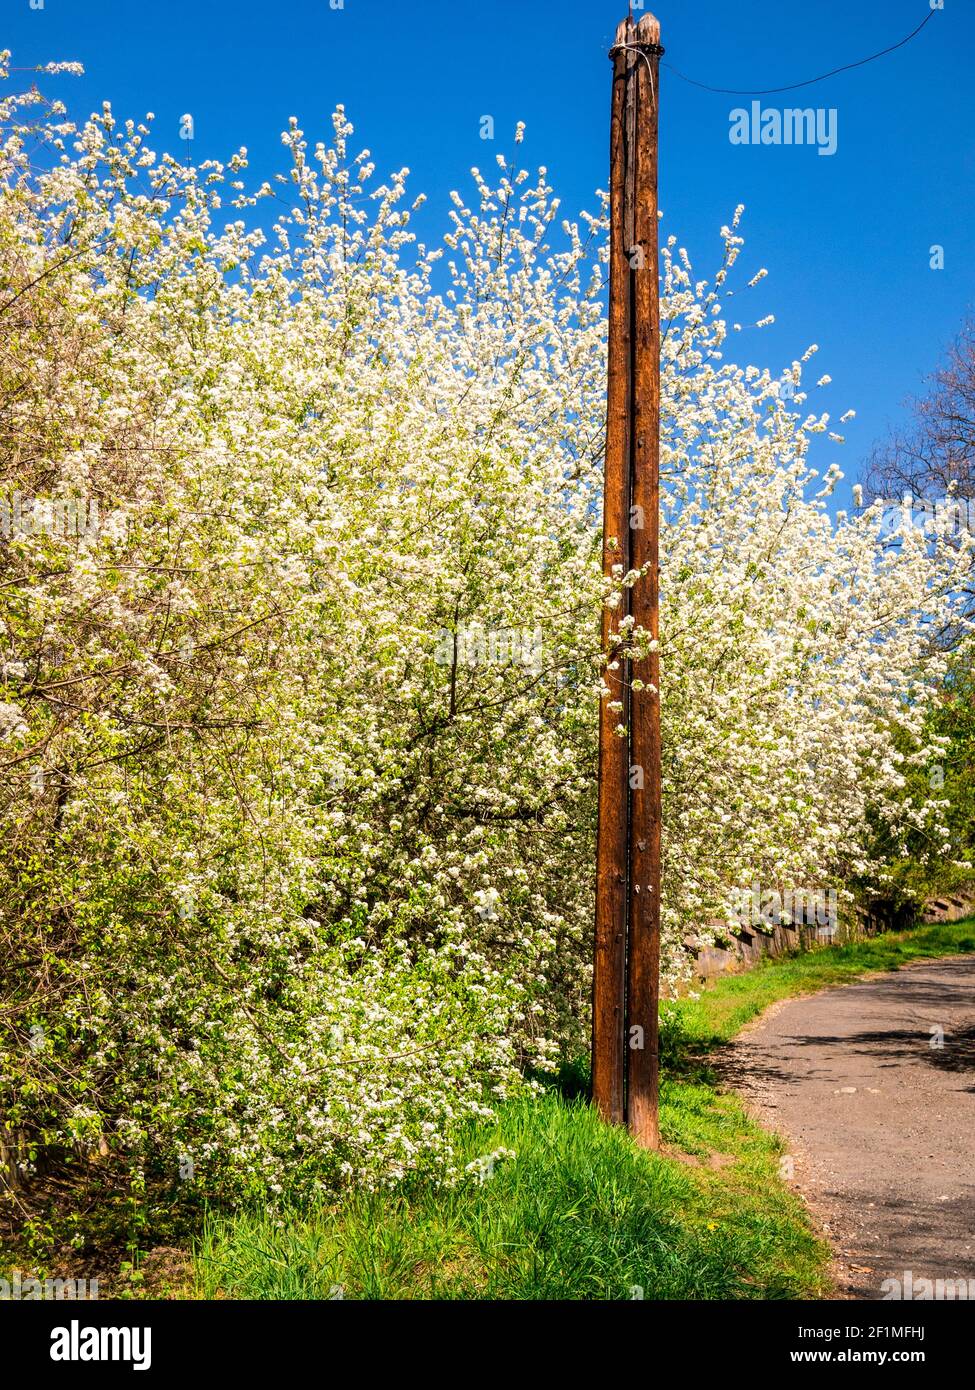 Old wooden telegraph pole on the side of the road with flowering wild cherry trees. Stock Photo